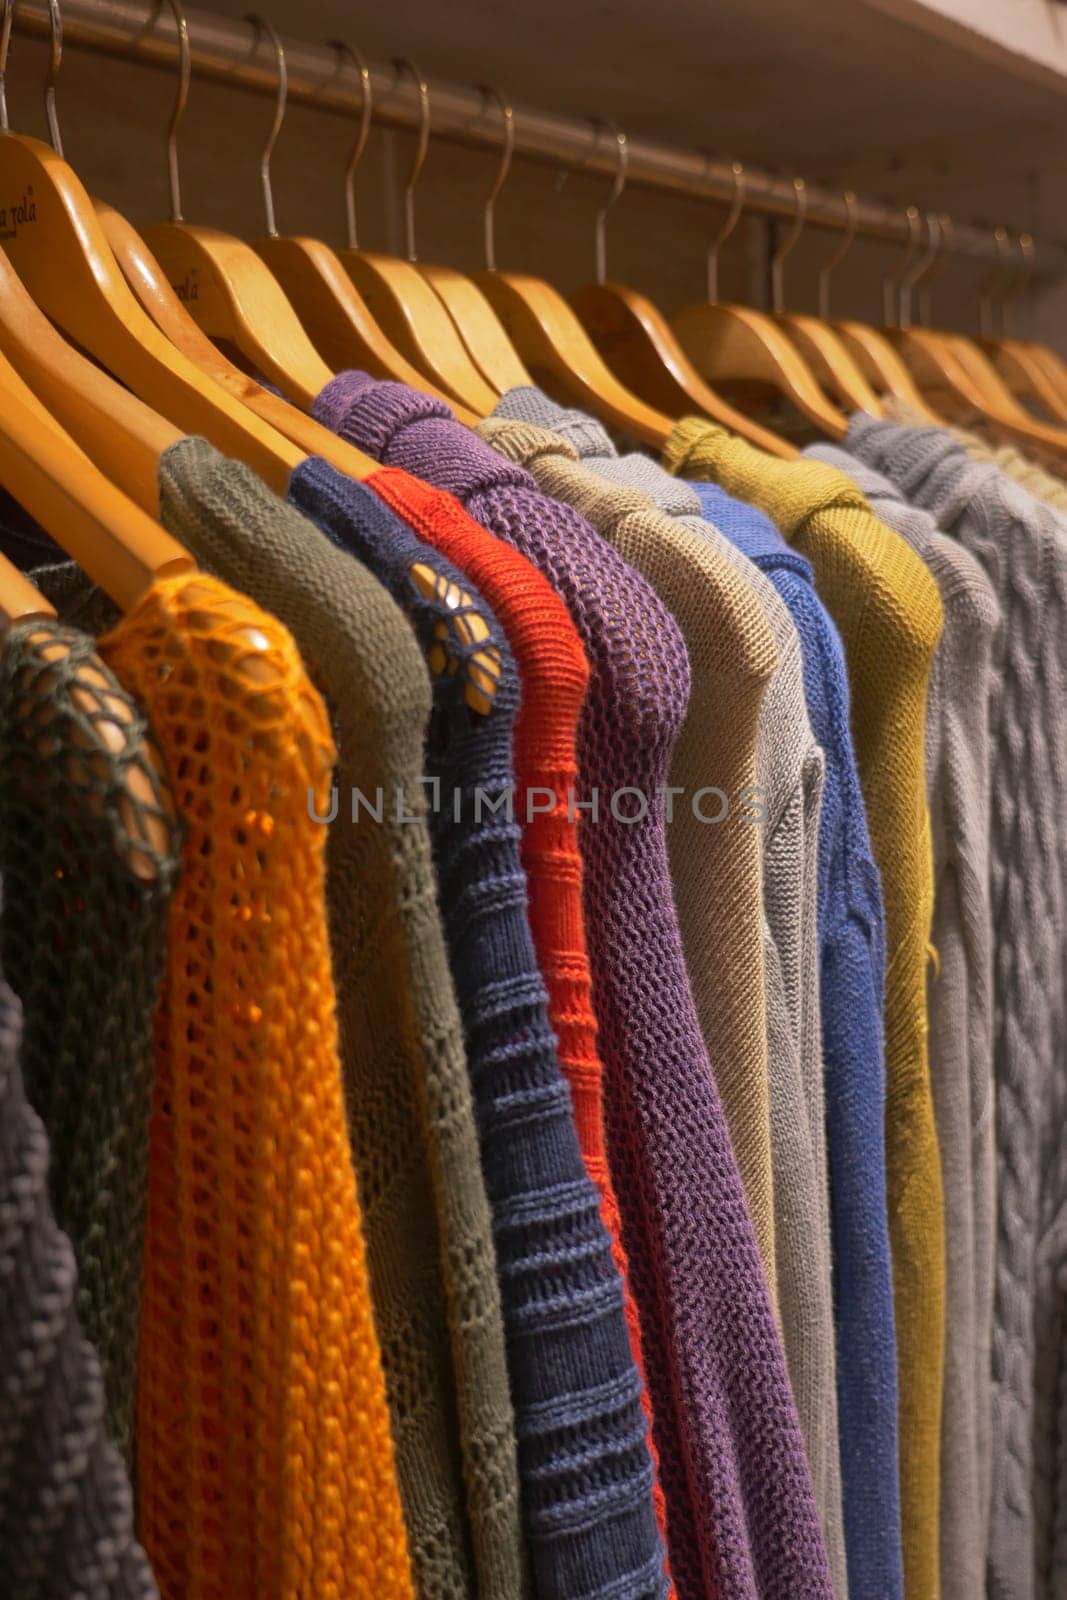 Colorful sweaters displayed on wooden clothes hangers.